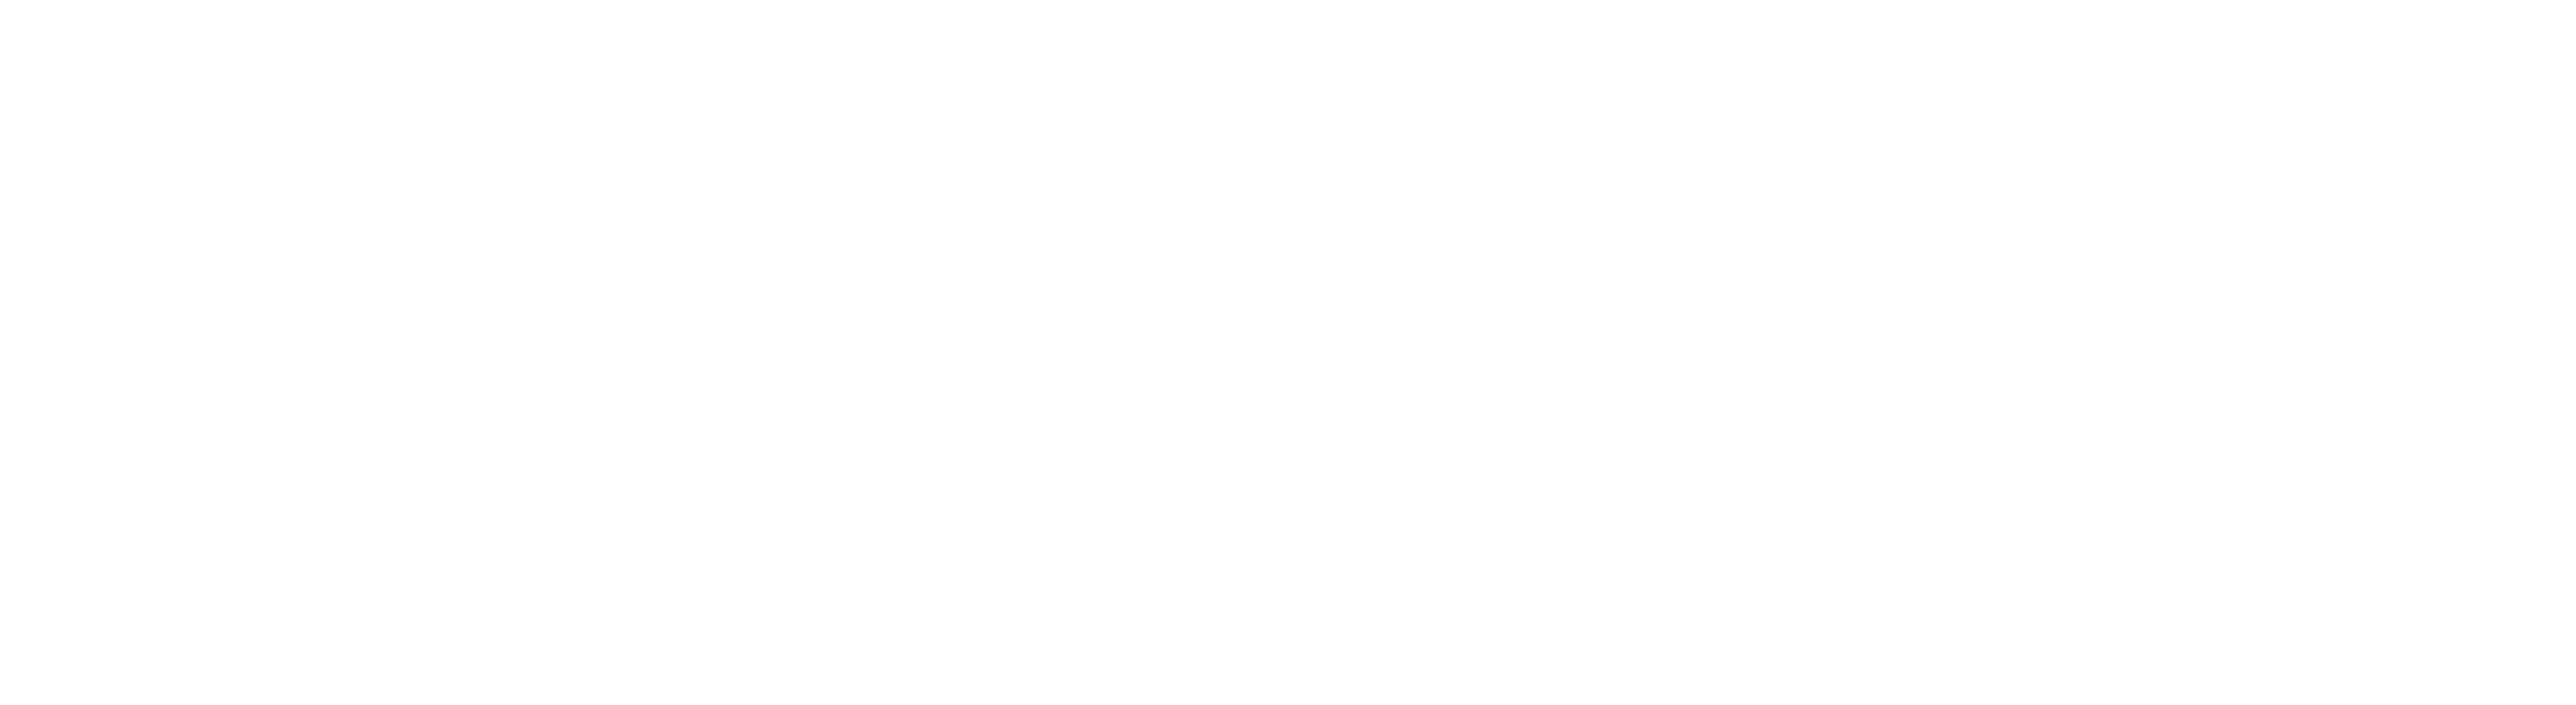 Comedy Club Production